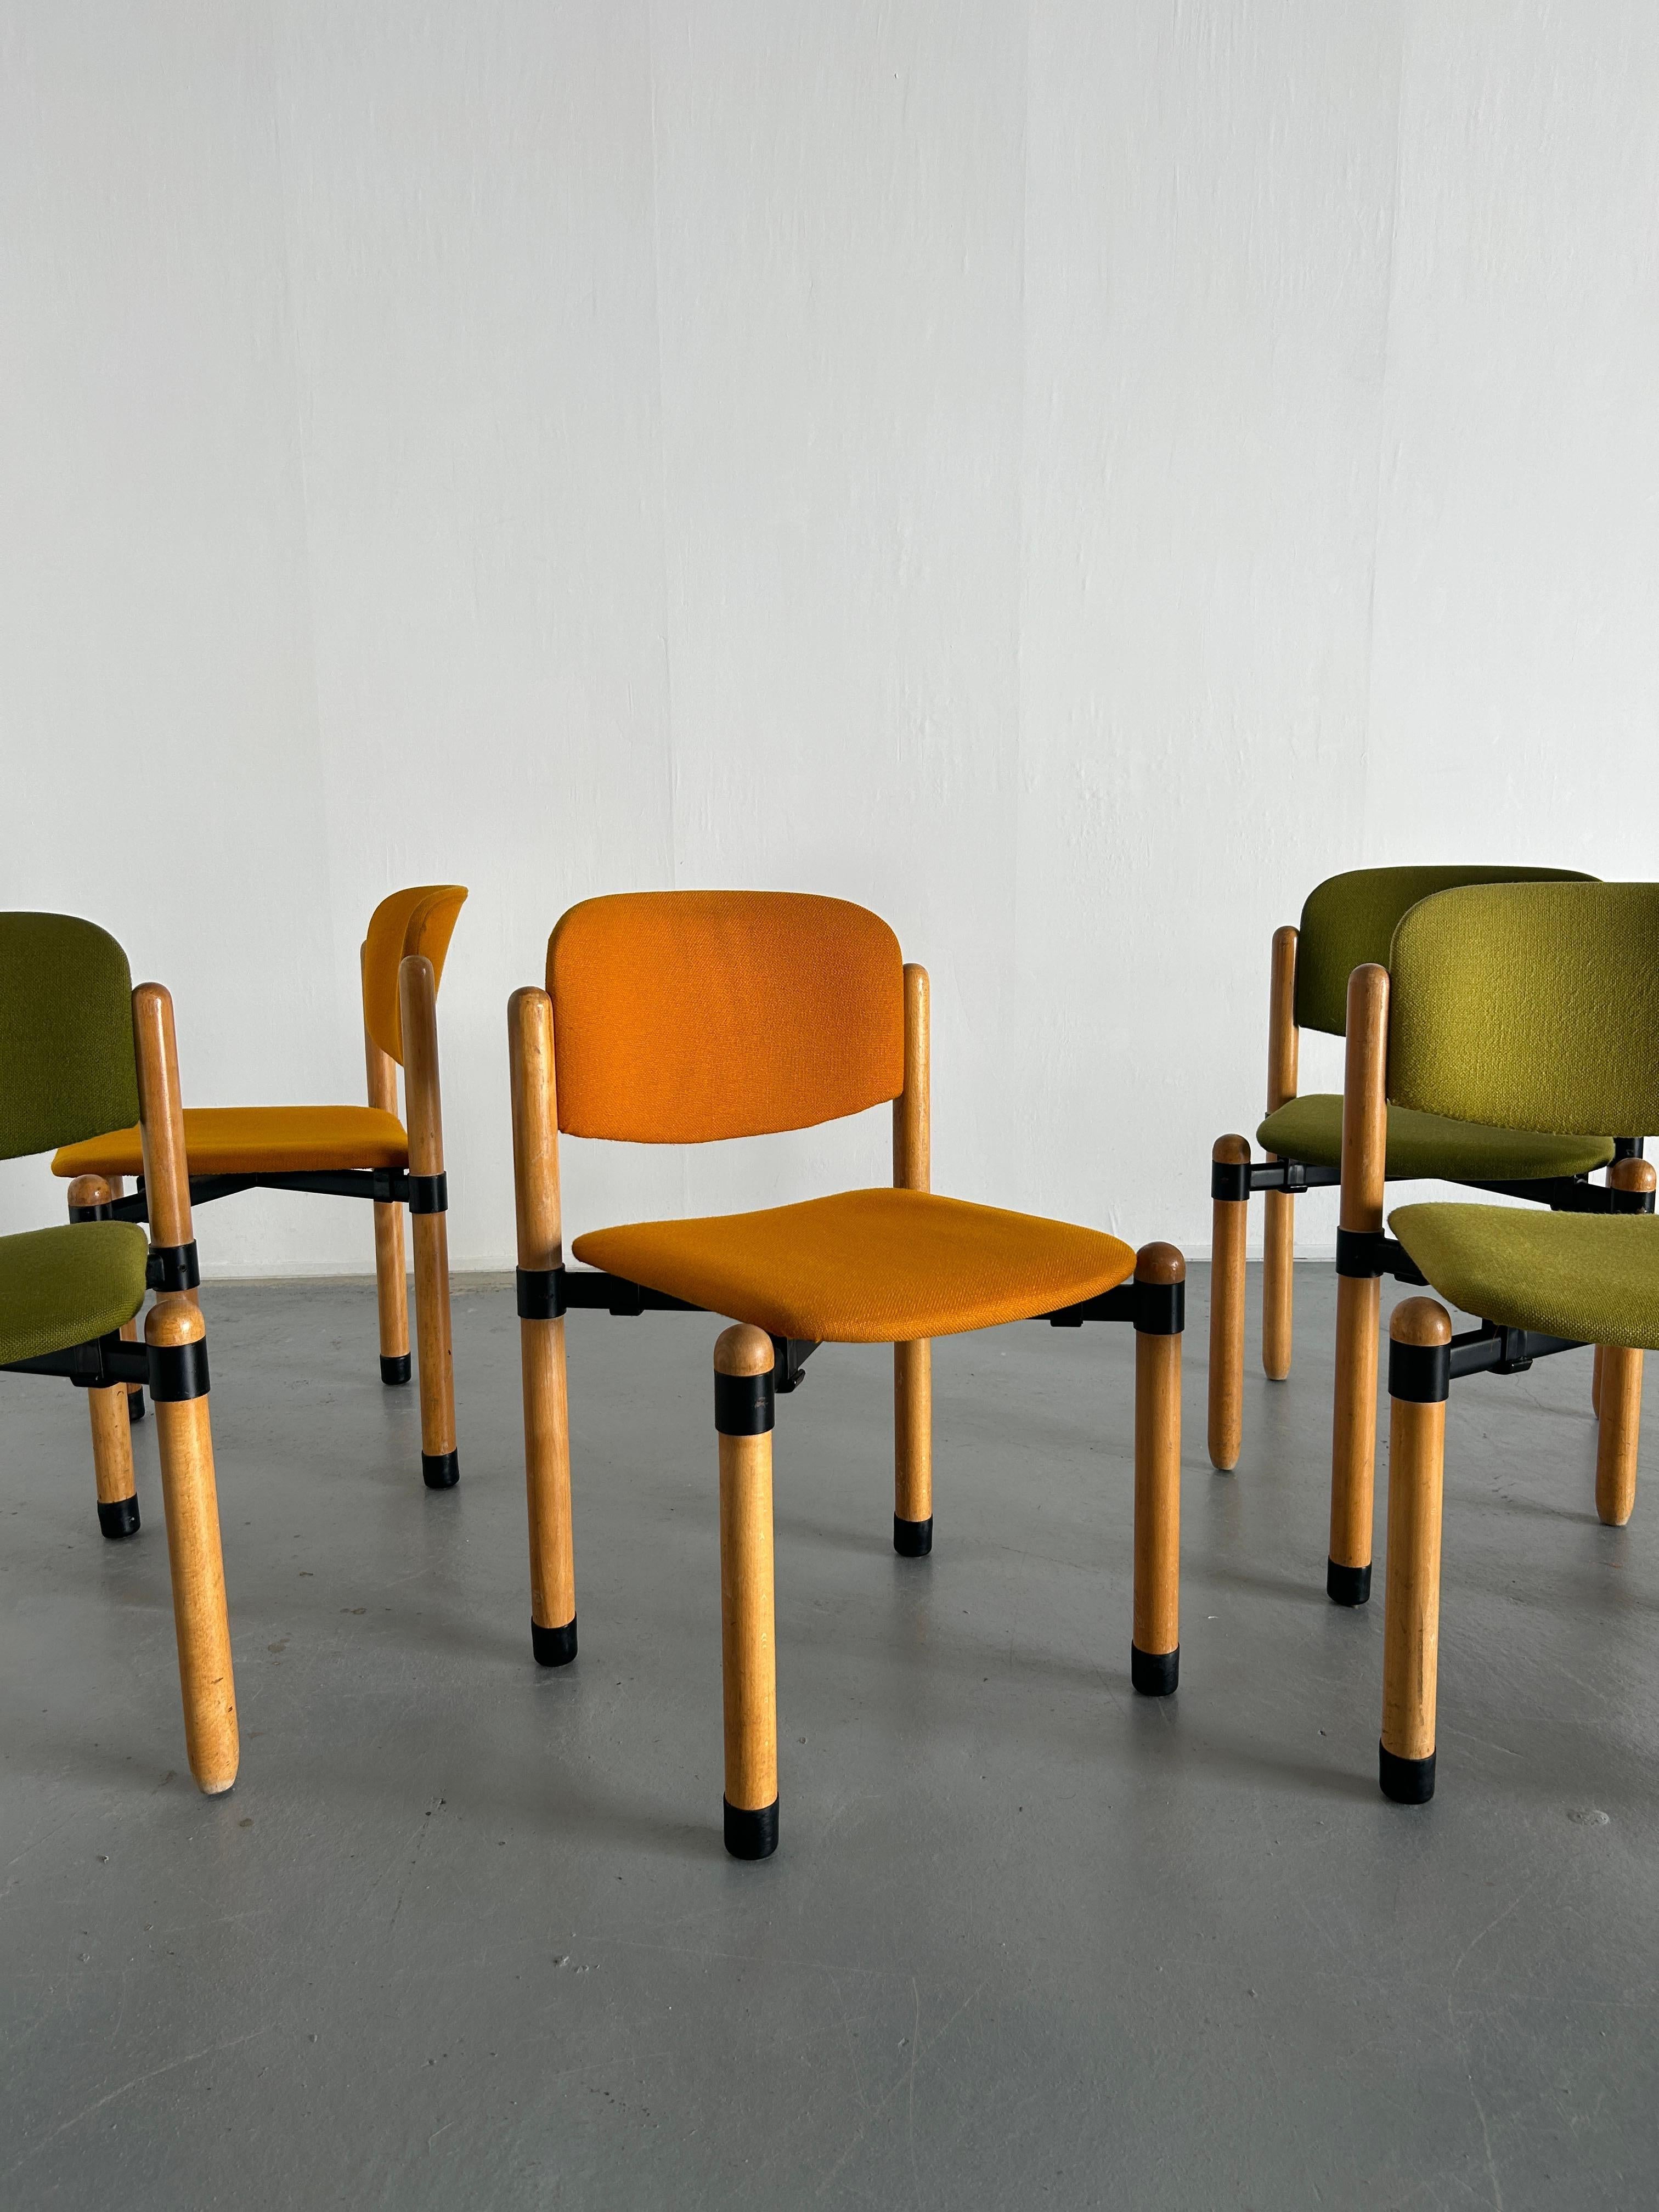 Mid-Century Modern stackable dining charis or visitor chairs produced by Fröscher Sitform, 1970s West Germany.
Robust and high production quality.
30 pieces available.

In very good vintage condition with smaller expected signs of age. 
Structurally